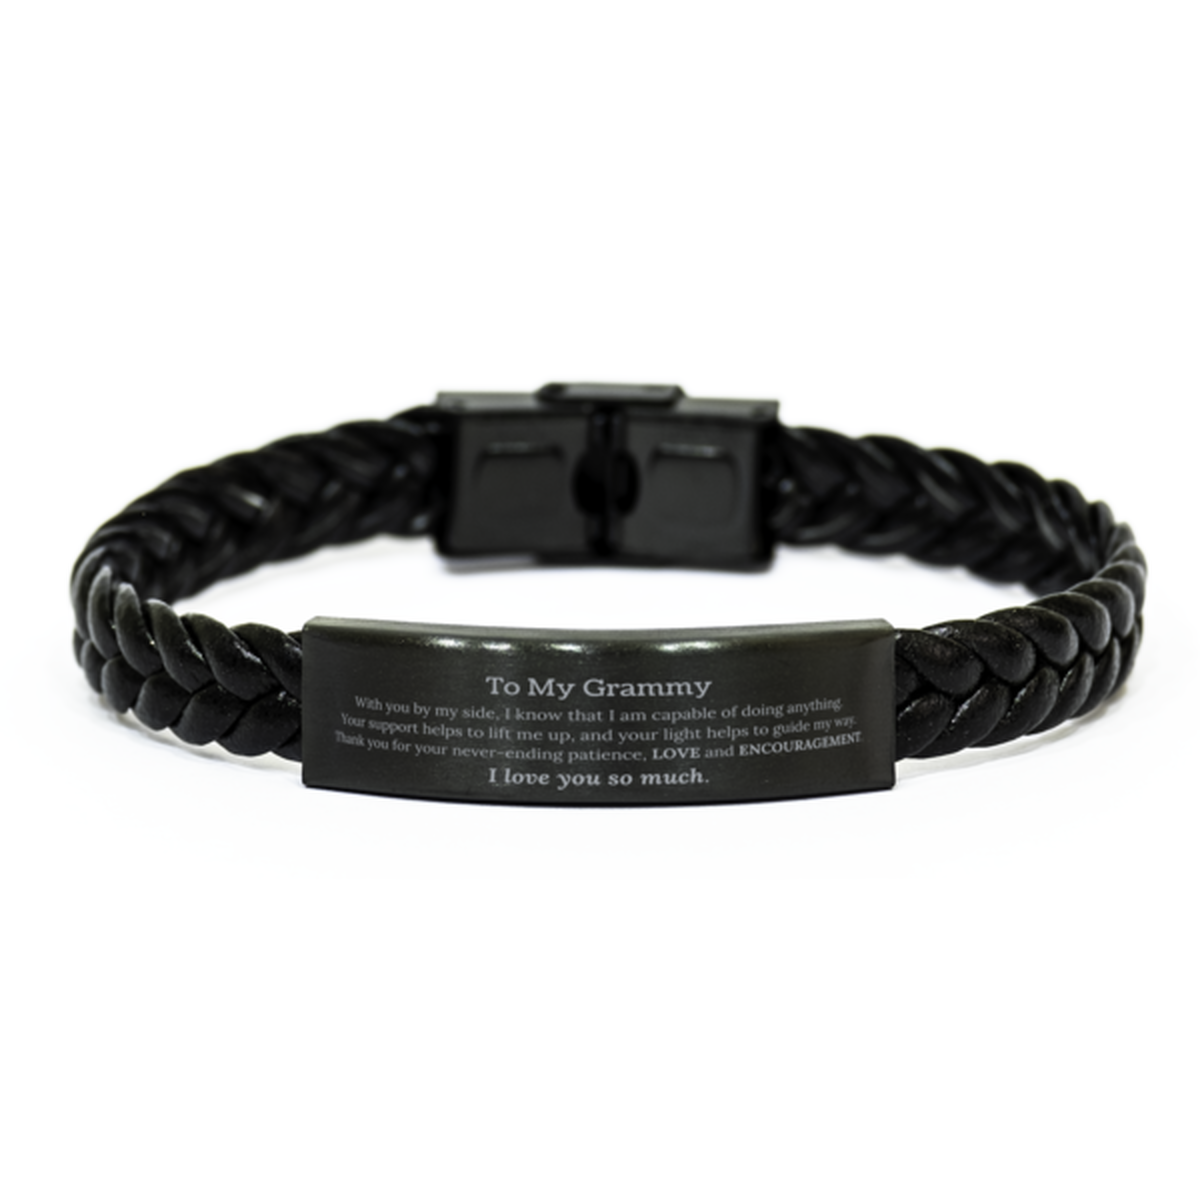 Appreciation Grammy Braided Leather Bracelet Gifts, To My Grammy Birthday Christmas Wedding Keepsake Gifts for Grammy With you by my side, I know that I am capable of doing anything. I love you so much